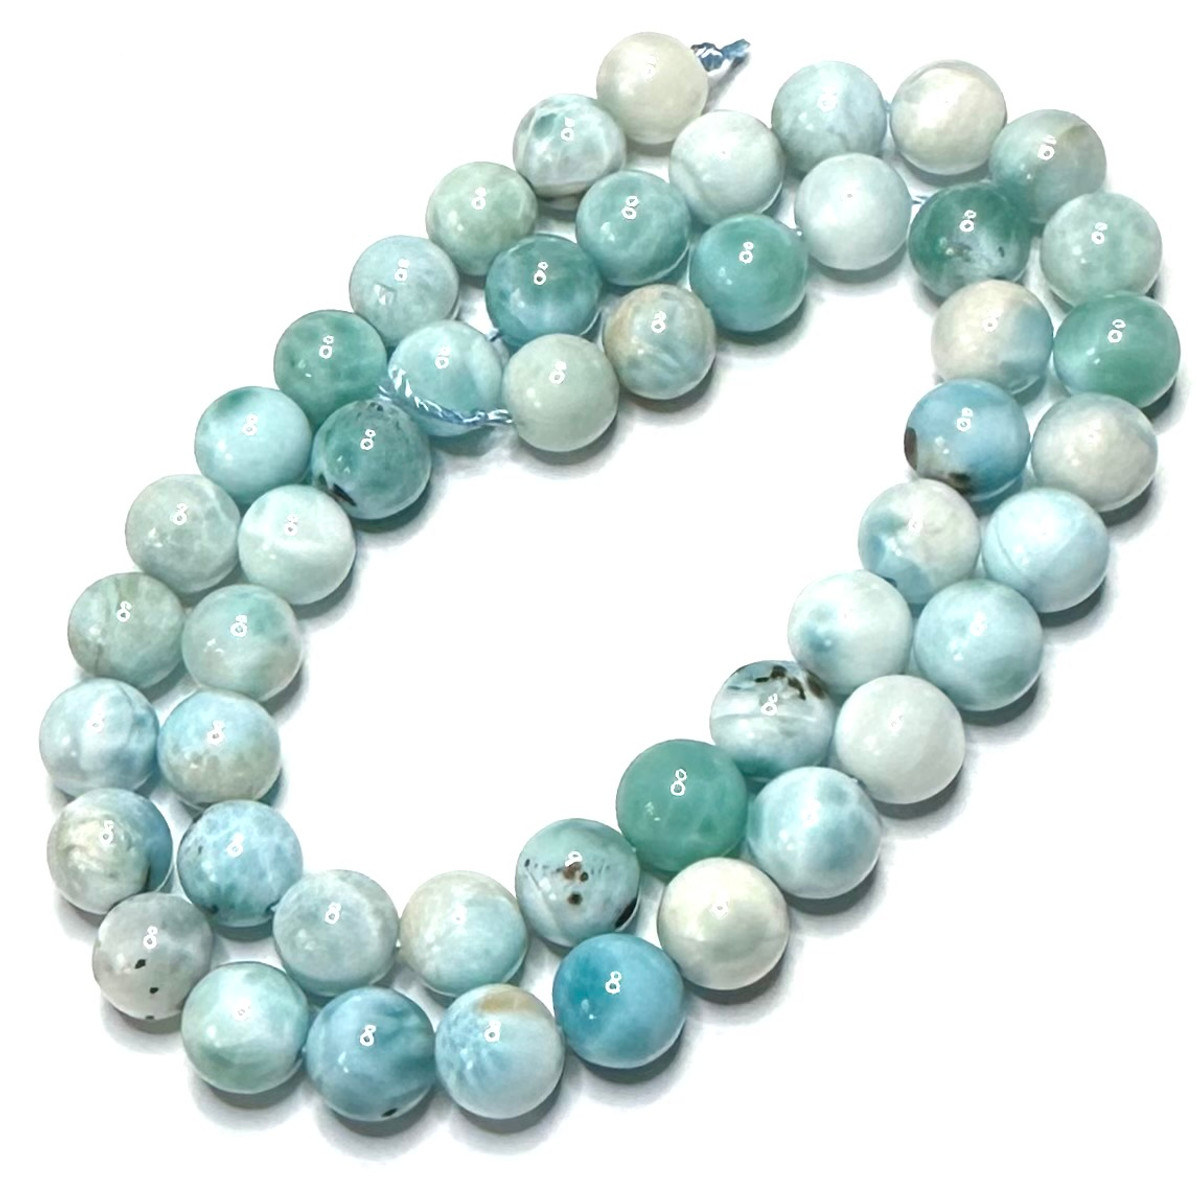 Unique Beads for Sale  Unusual Beads Wholesale